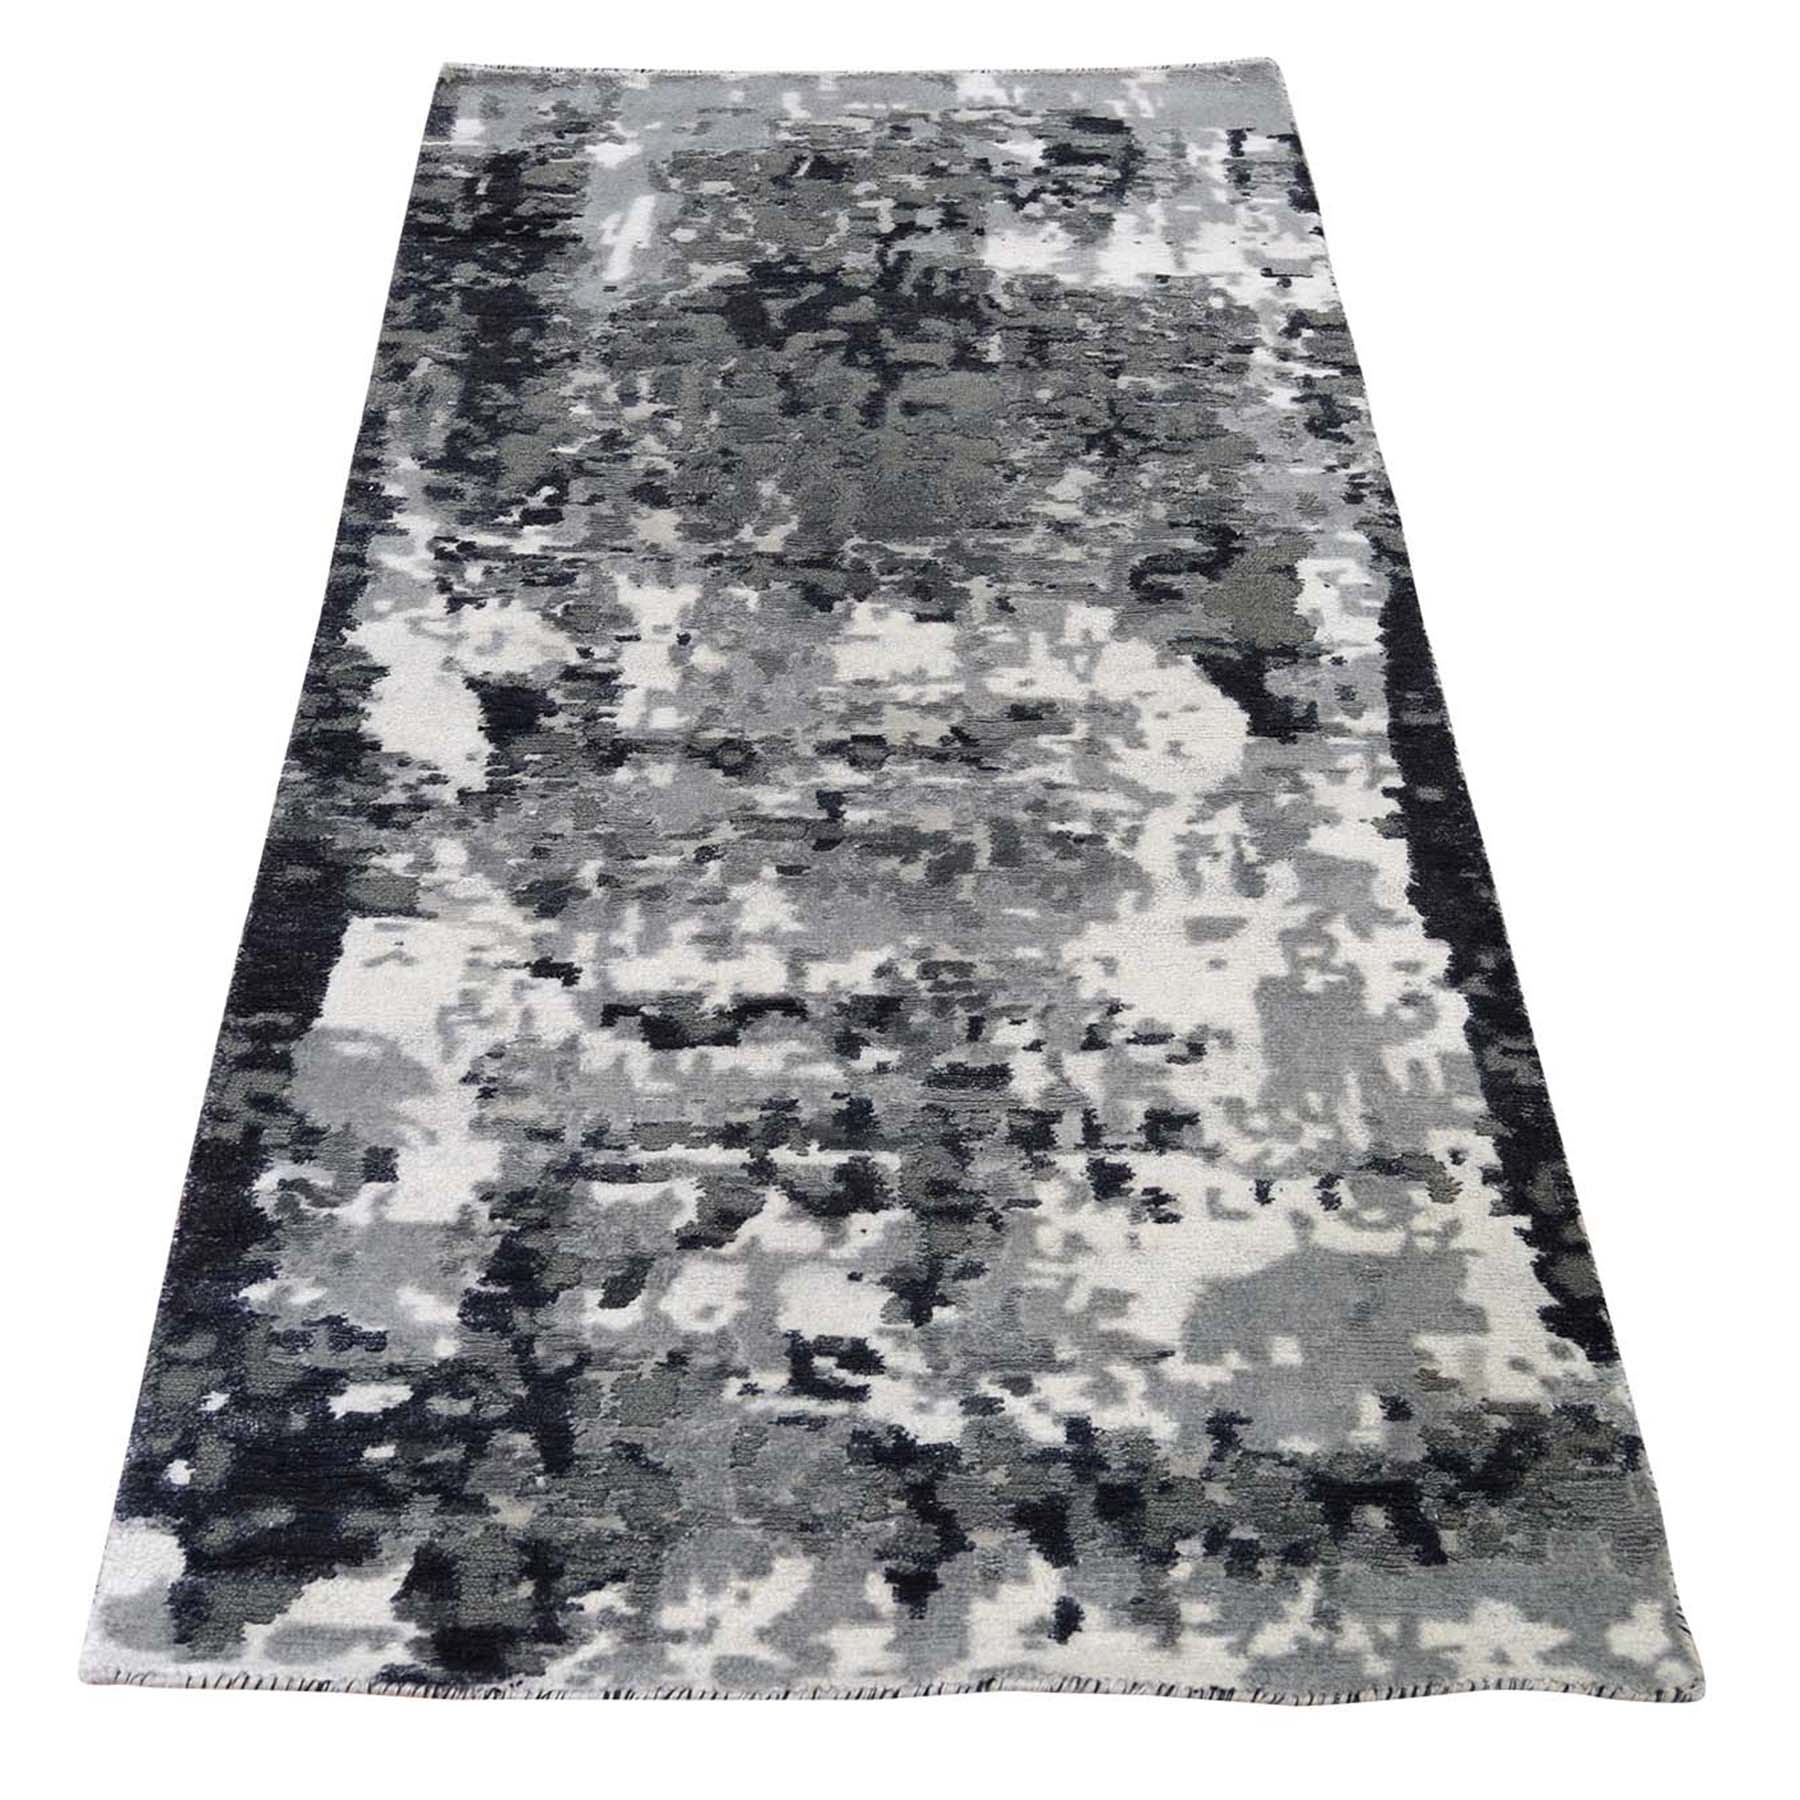 2'7"X5'9" Hi-Low Pile Abstract Design Wool And Silk Runner Hand-Knotted Oriental Rug moad6ccd